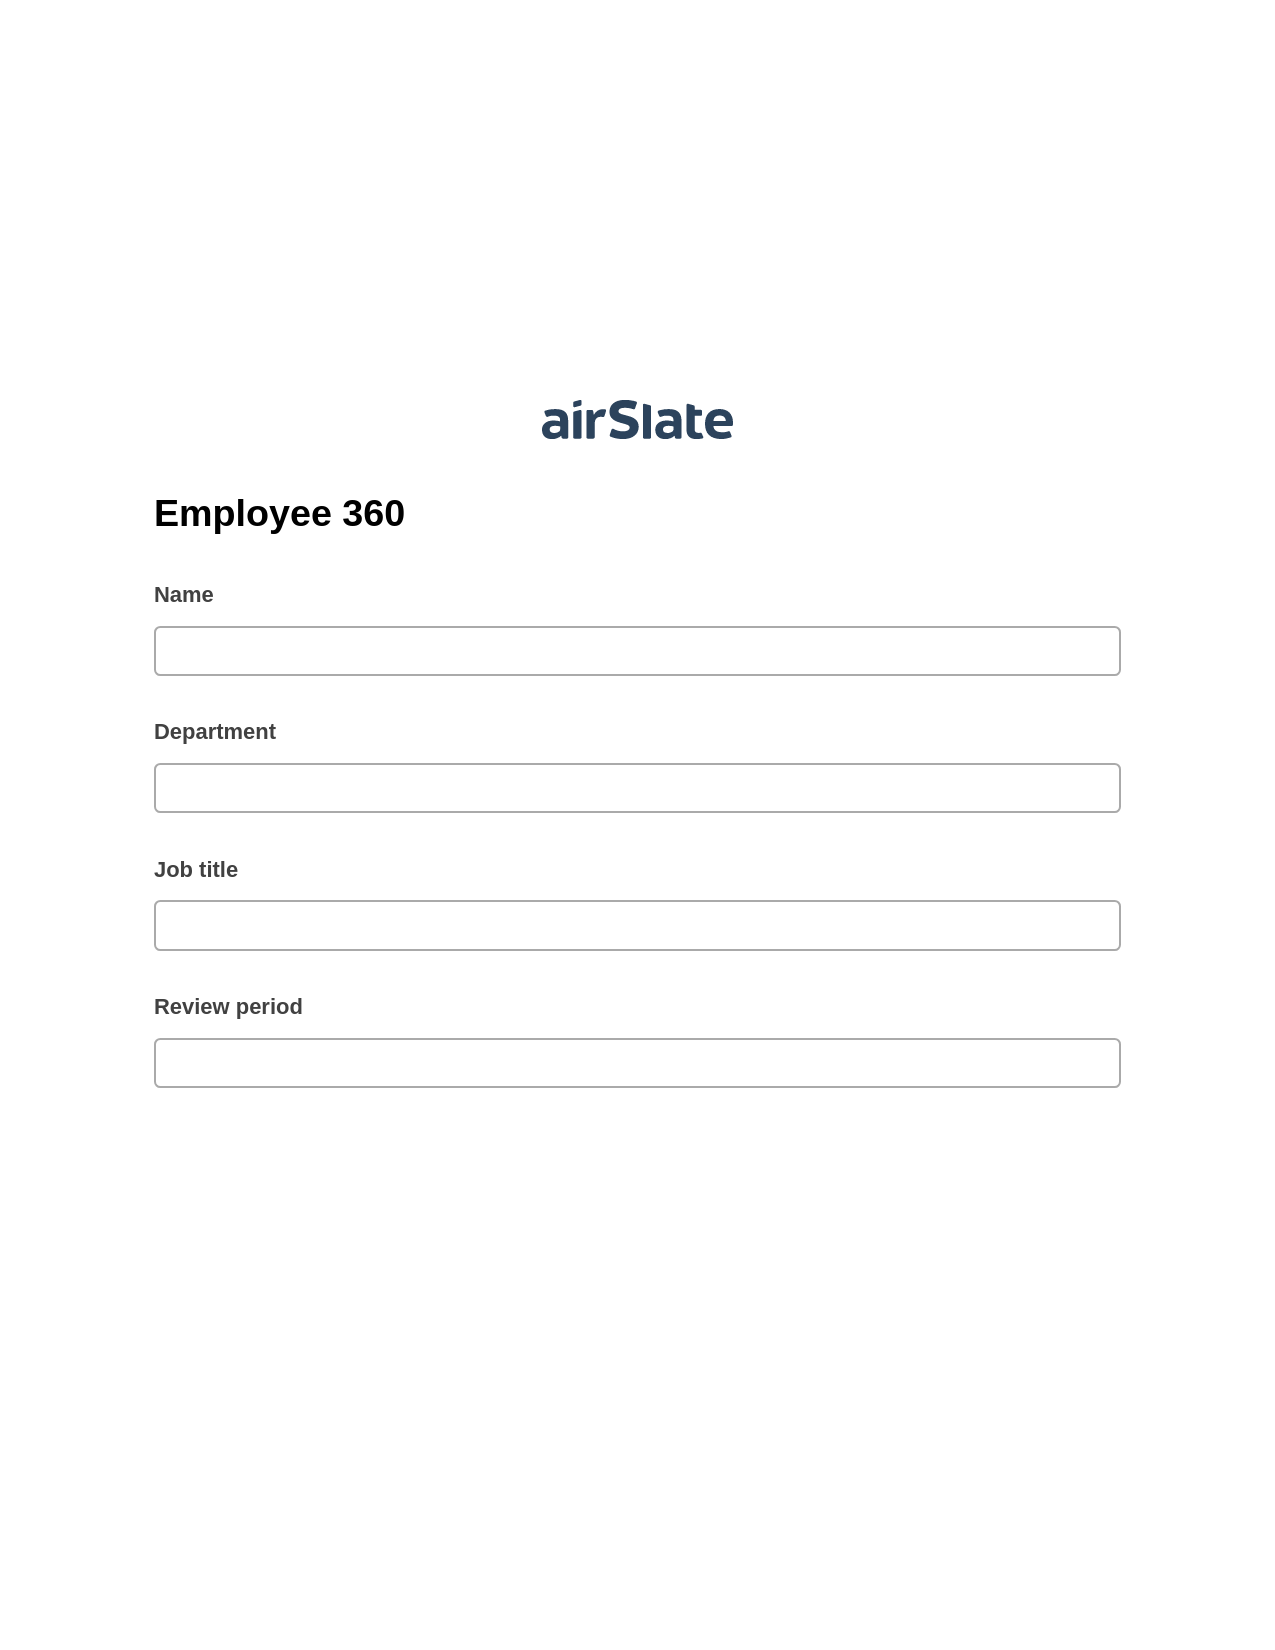 Employee 360 Pre-fill Dropdowns from CSV file Bot, Update MS Dynamics 365 Record Bot, Archive to SharePoint Folder Bot